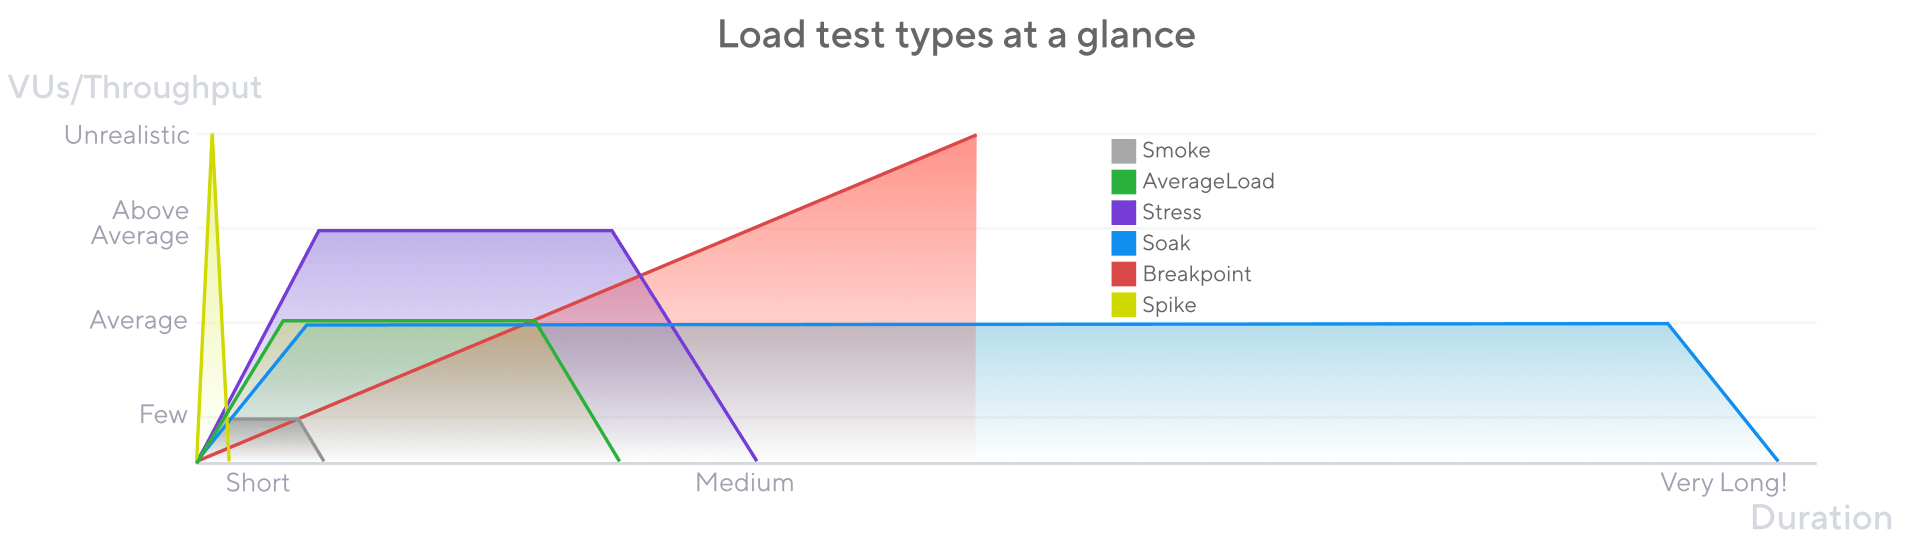 Diagram showing the different load testing types and load volumes and durations for each test. 